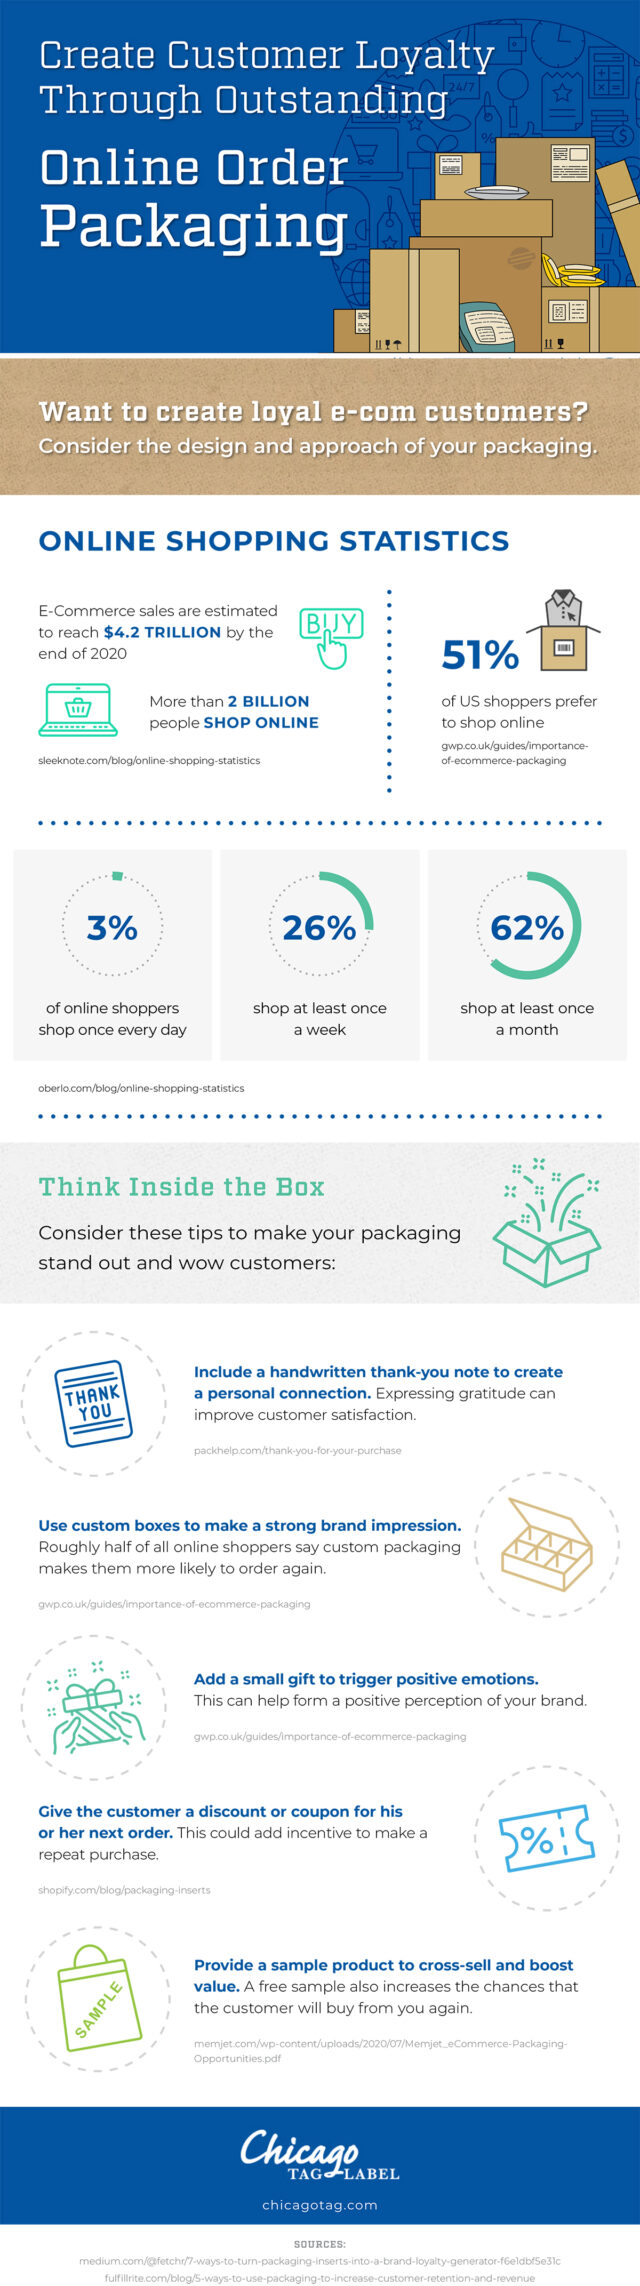 Create customer loyalty through outstanding online order packaging - infographic